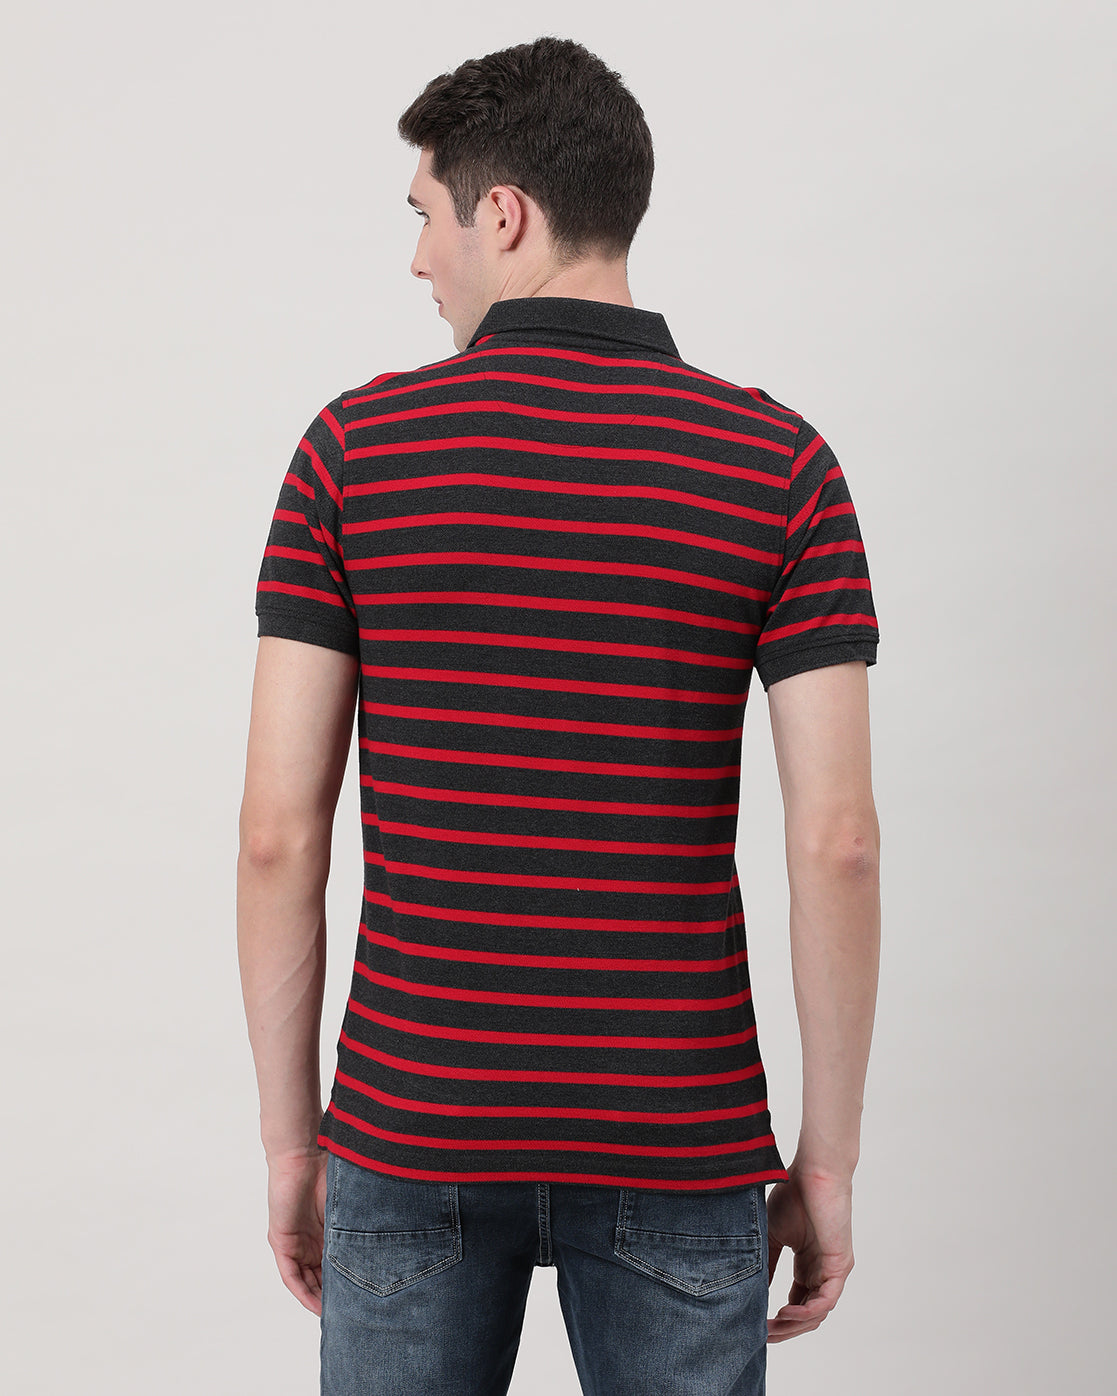 Casual Red T-Shirt Striper Half Sleeve Slim Fit with Collar